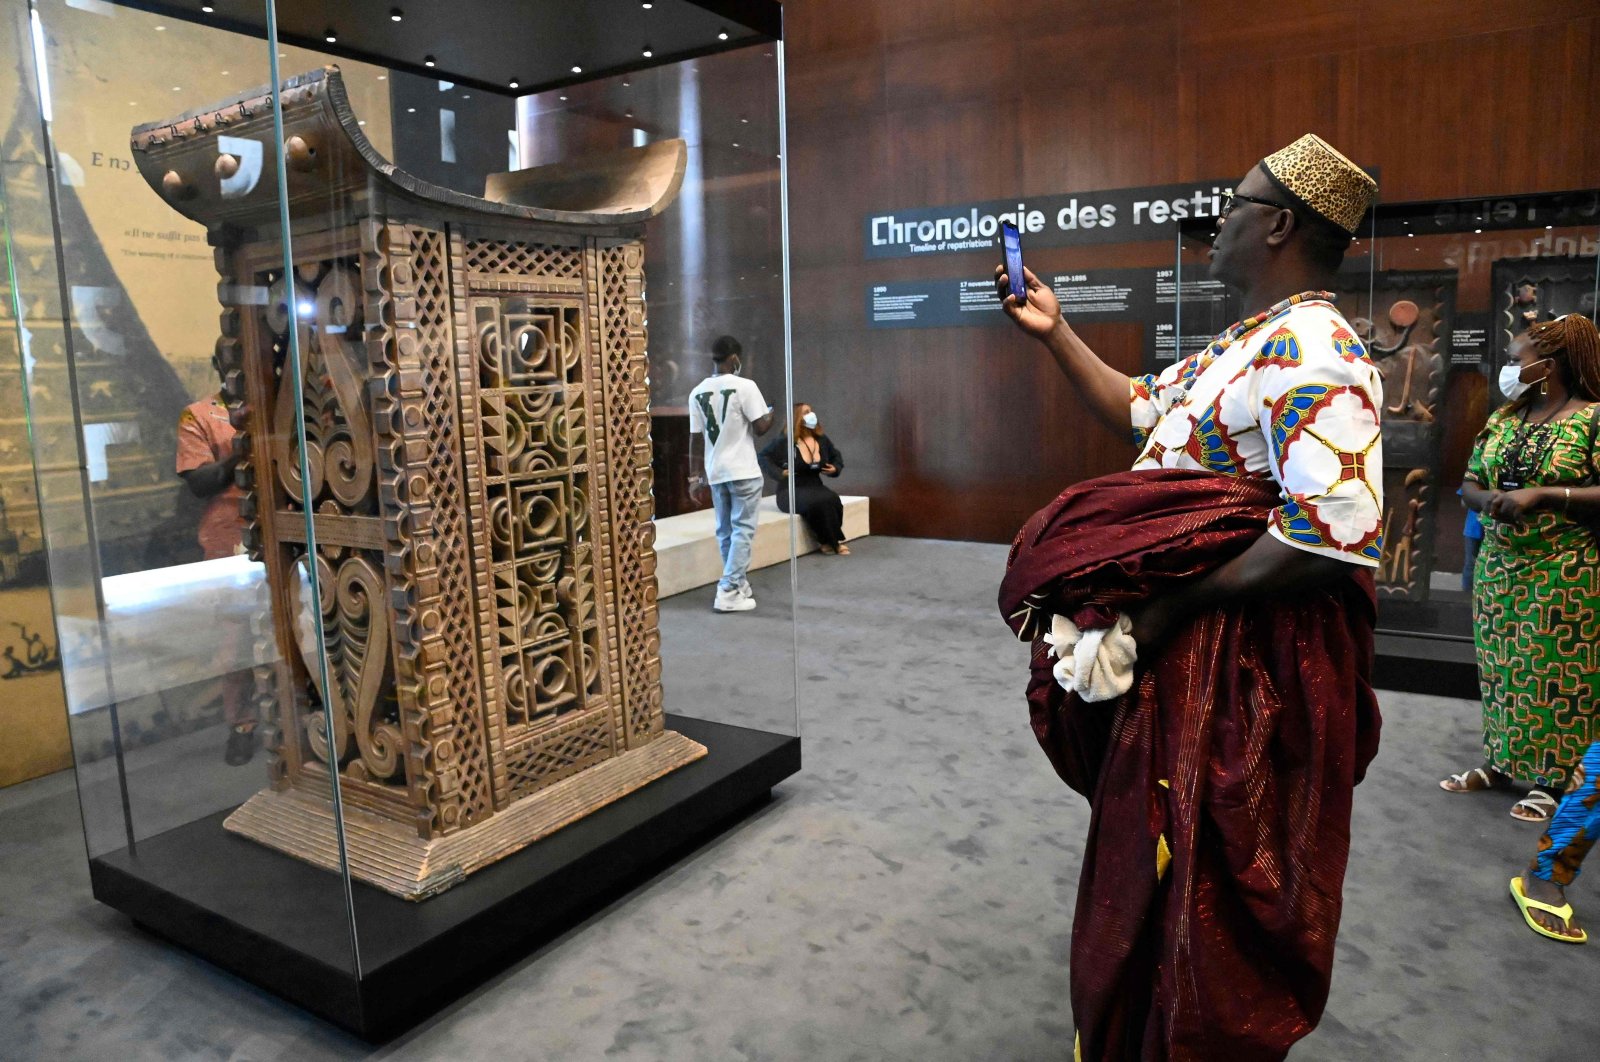 A man in traditional wares photographs with his smartphone the ceremonial throne of King Ghezo, one of the artifacts looted by French colonial soldiers returned and displayed for viewing by the general public during an exhibition at the presidency in the capital Cotonou, Benin, on Feb. 20, 2022. (Photo by PIUS UTOMI EKPEI / AFP)